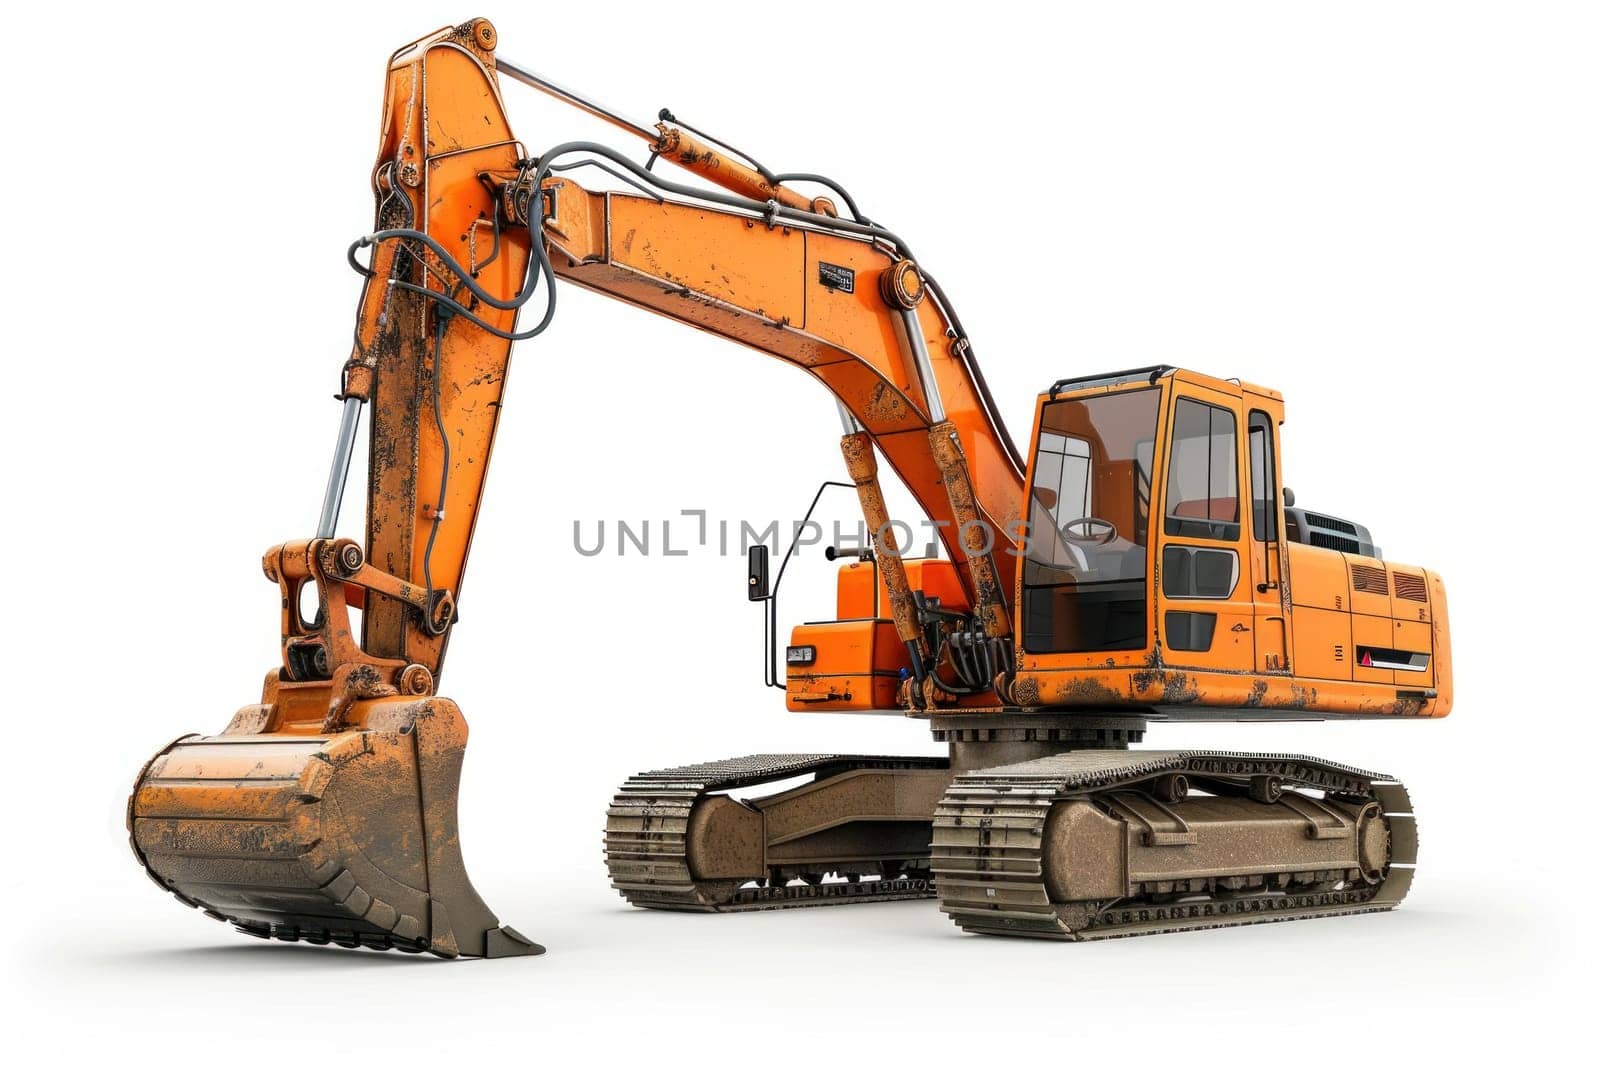 Man Operating an Excavator with Special Equipment on a White Background Concept Realistic Photo.